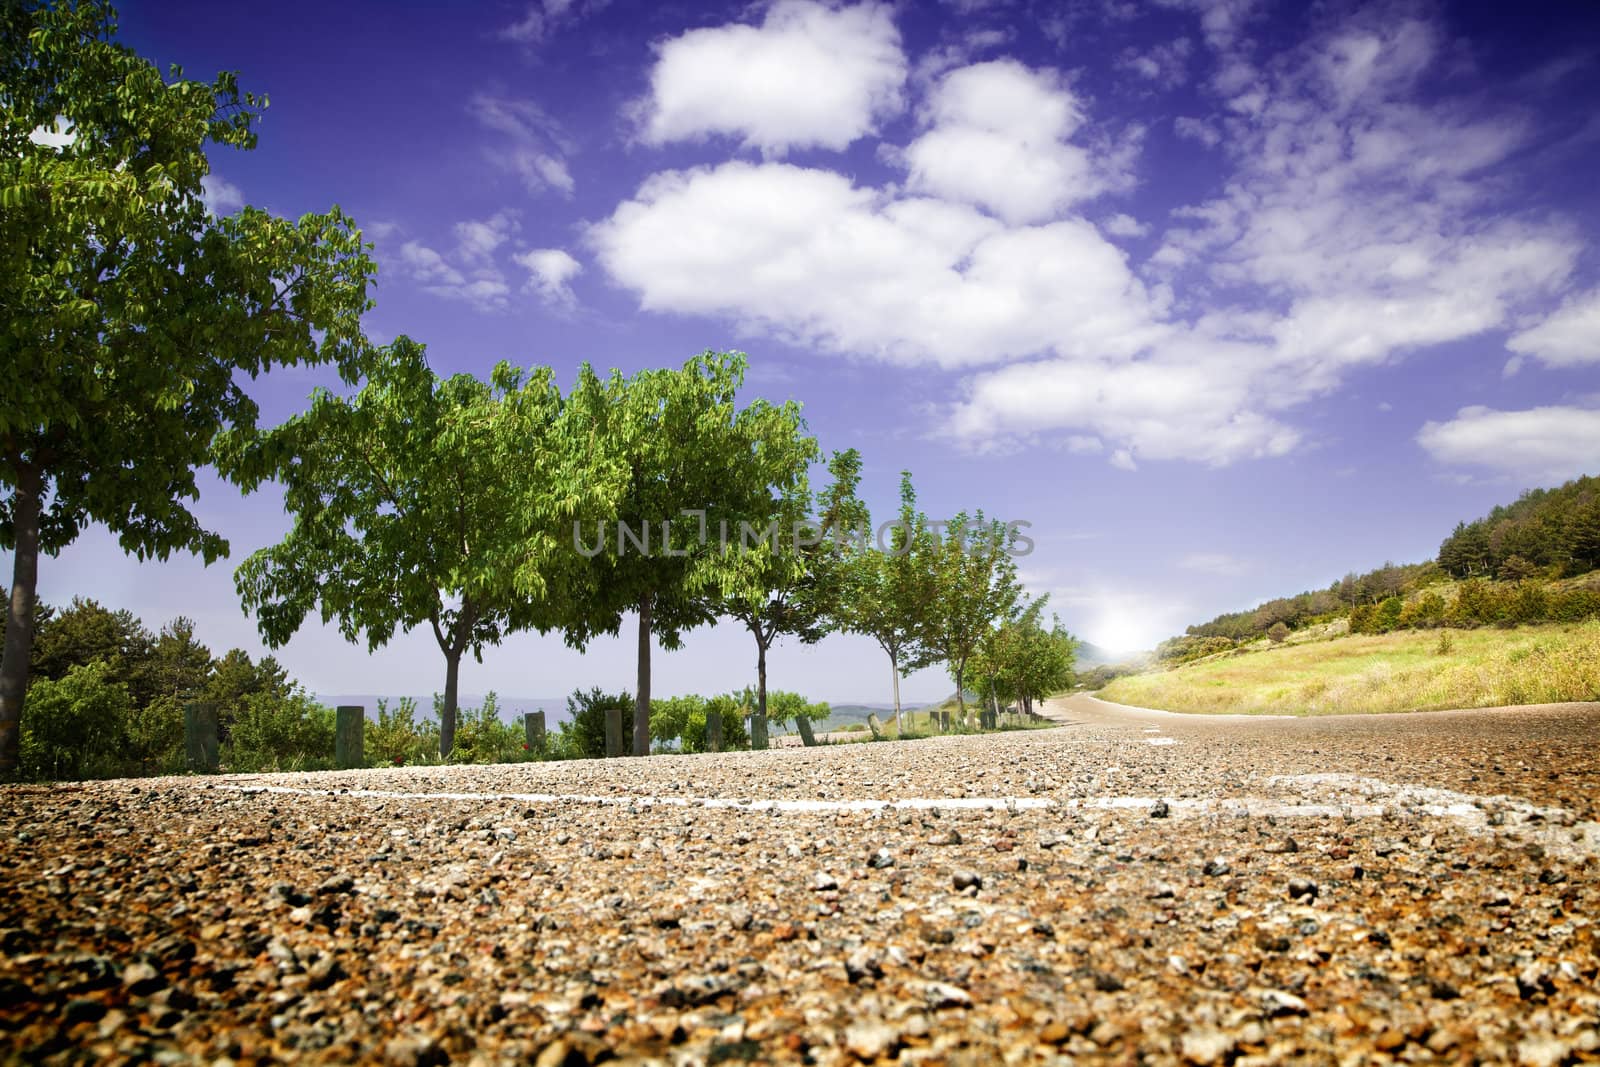 Landscape with road and trees by carloscastilla